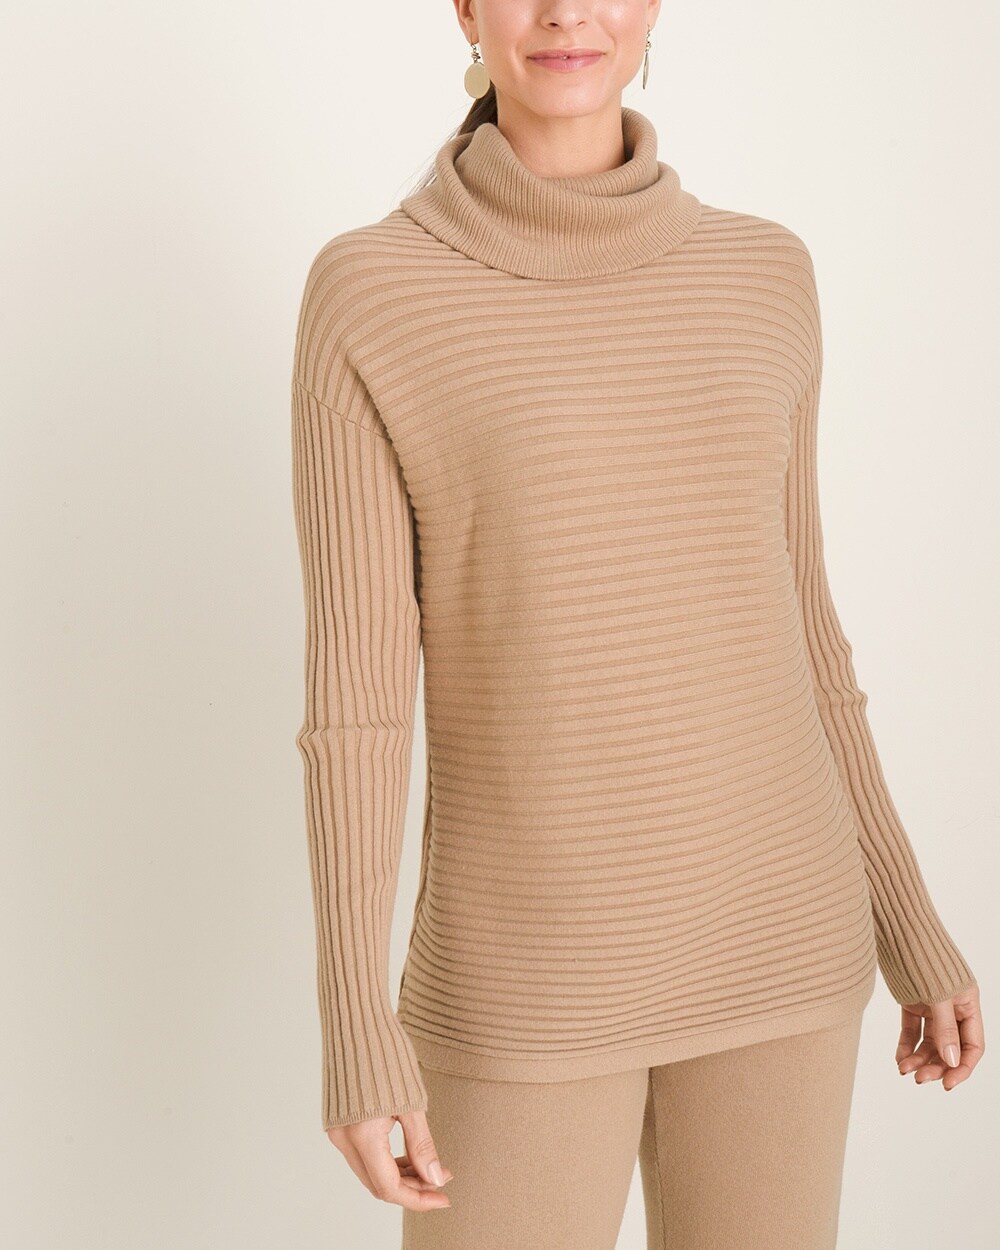 Zenergy Cotton-Cashmere Blend Cozy Ribbed Sweater